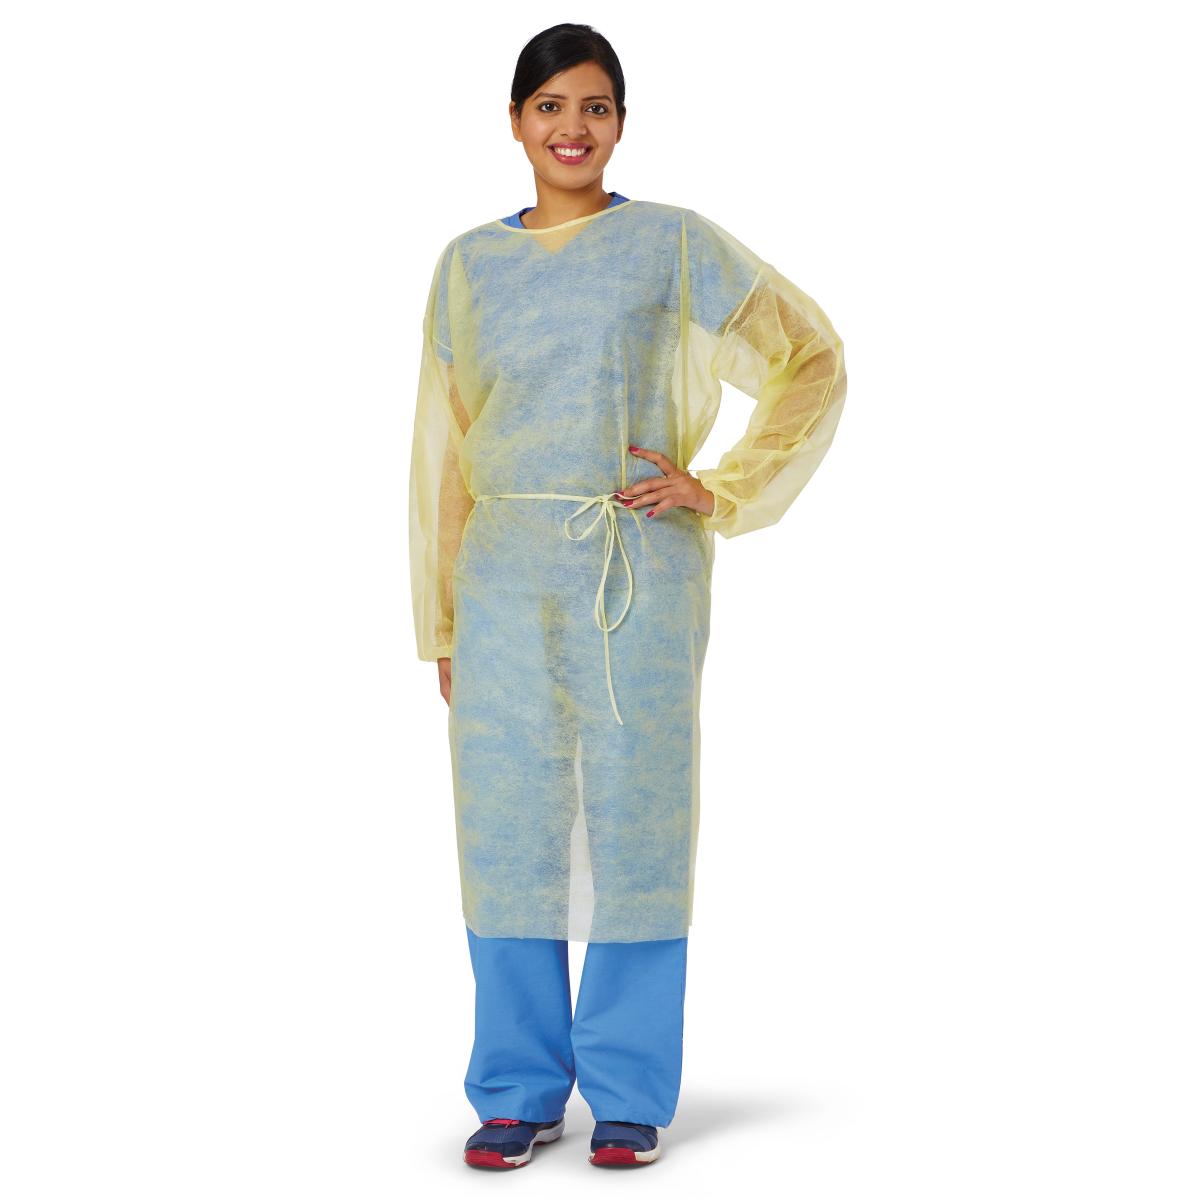 Medline Cover Gowns